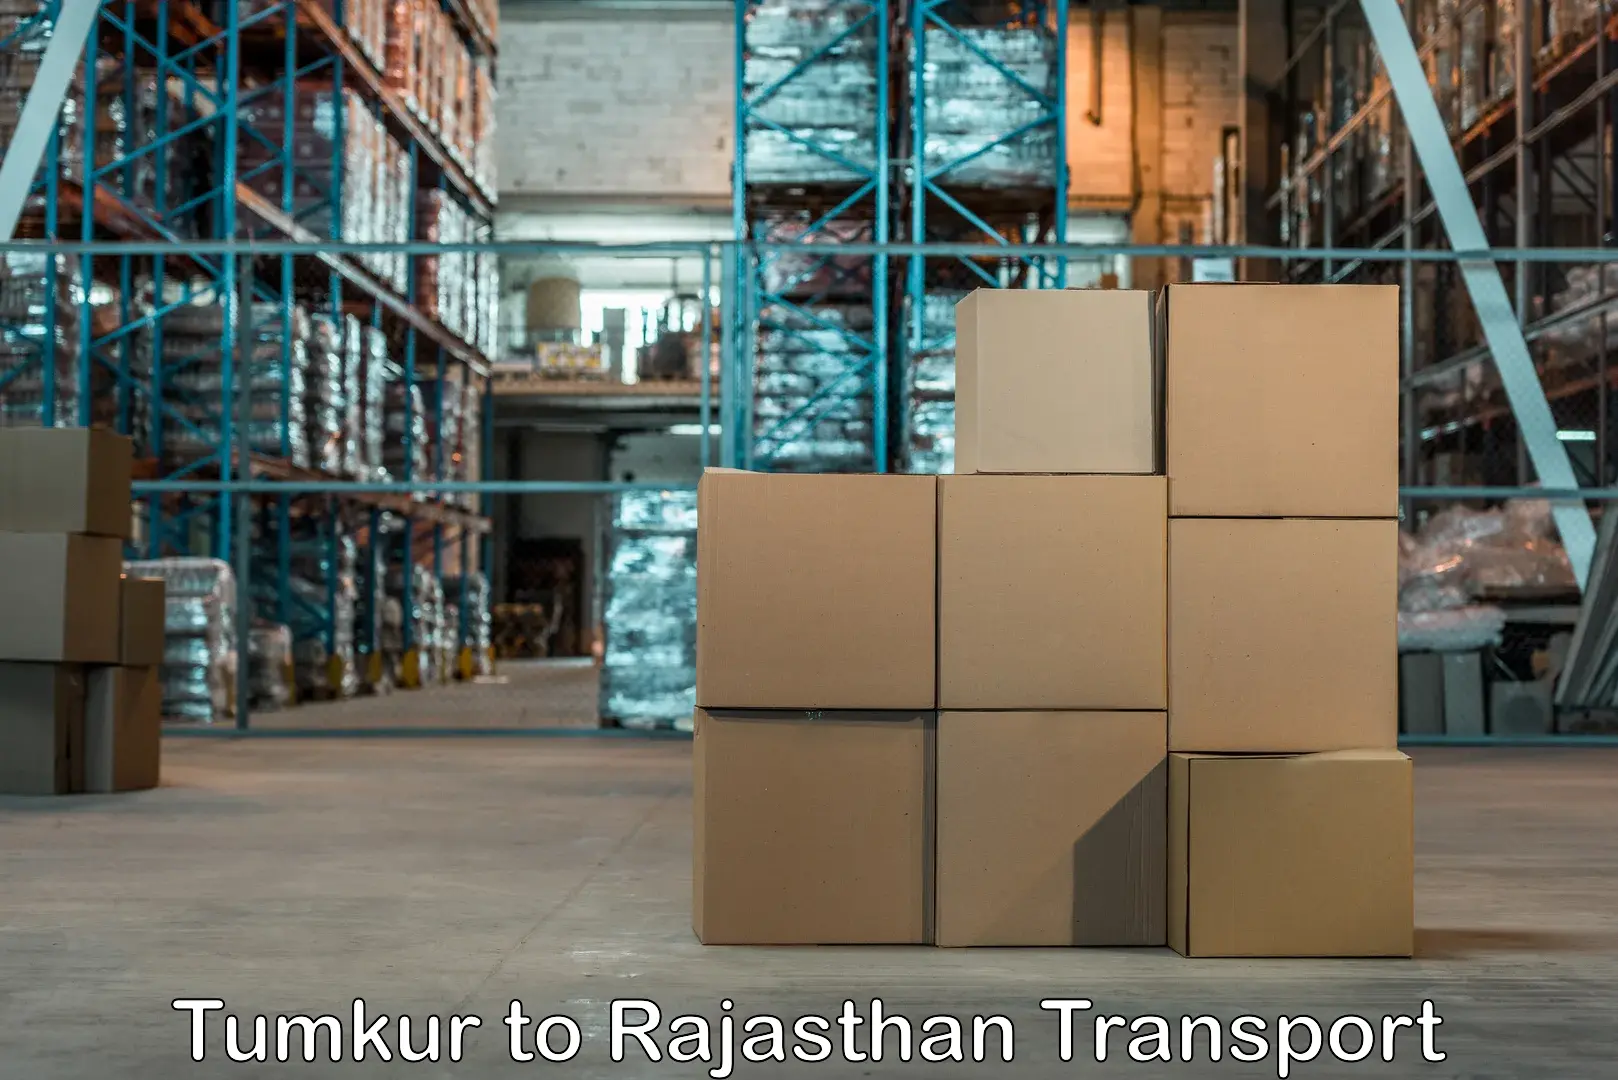 Container transport service Tumkur to Rajasthan